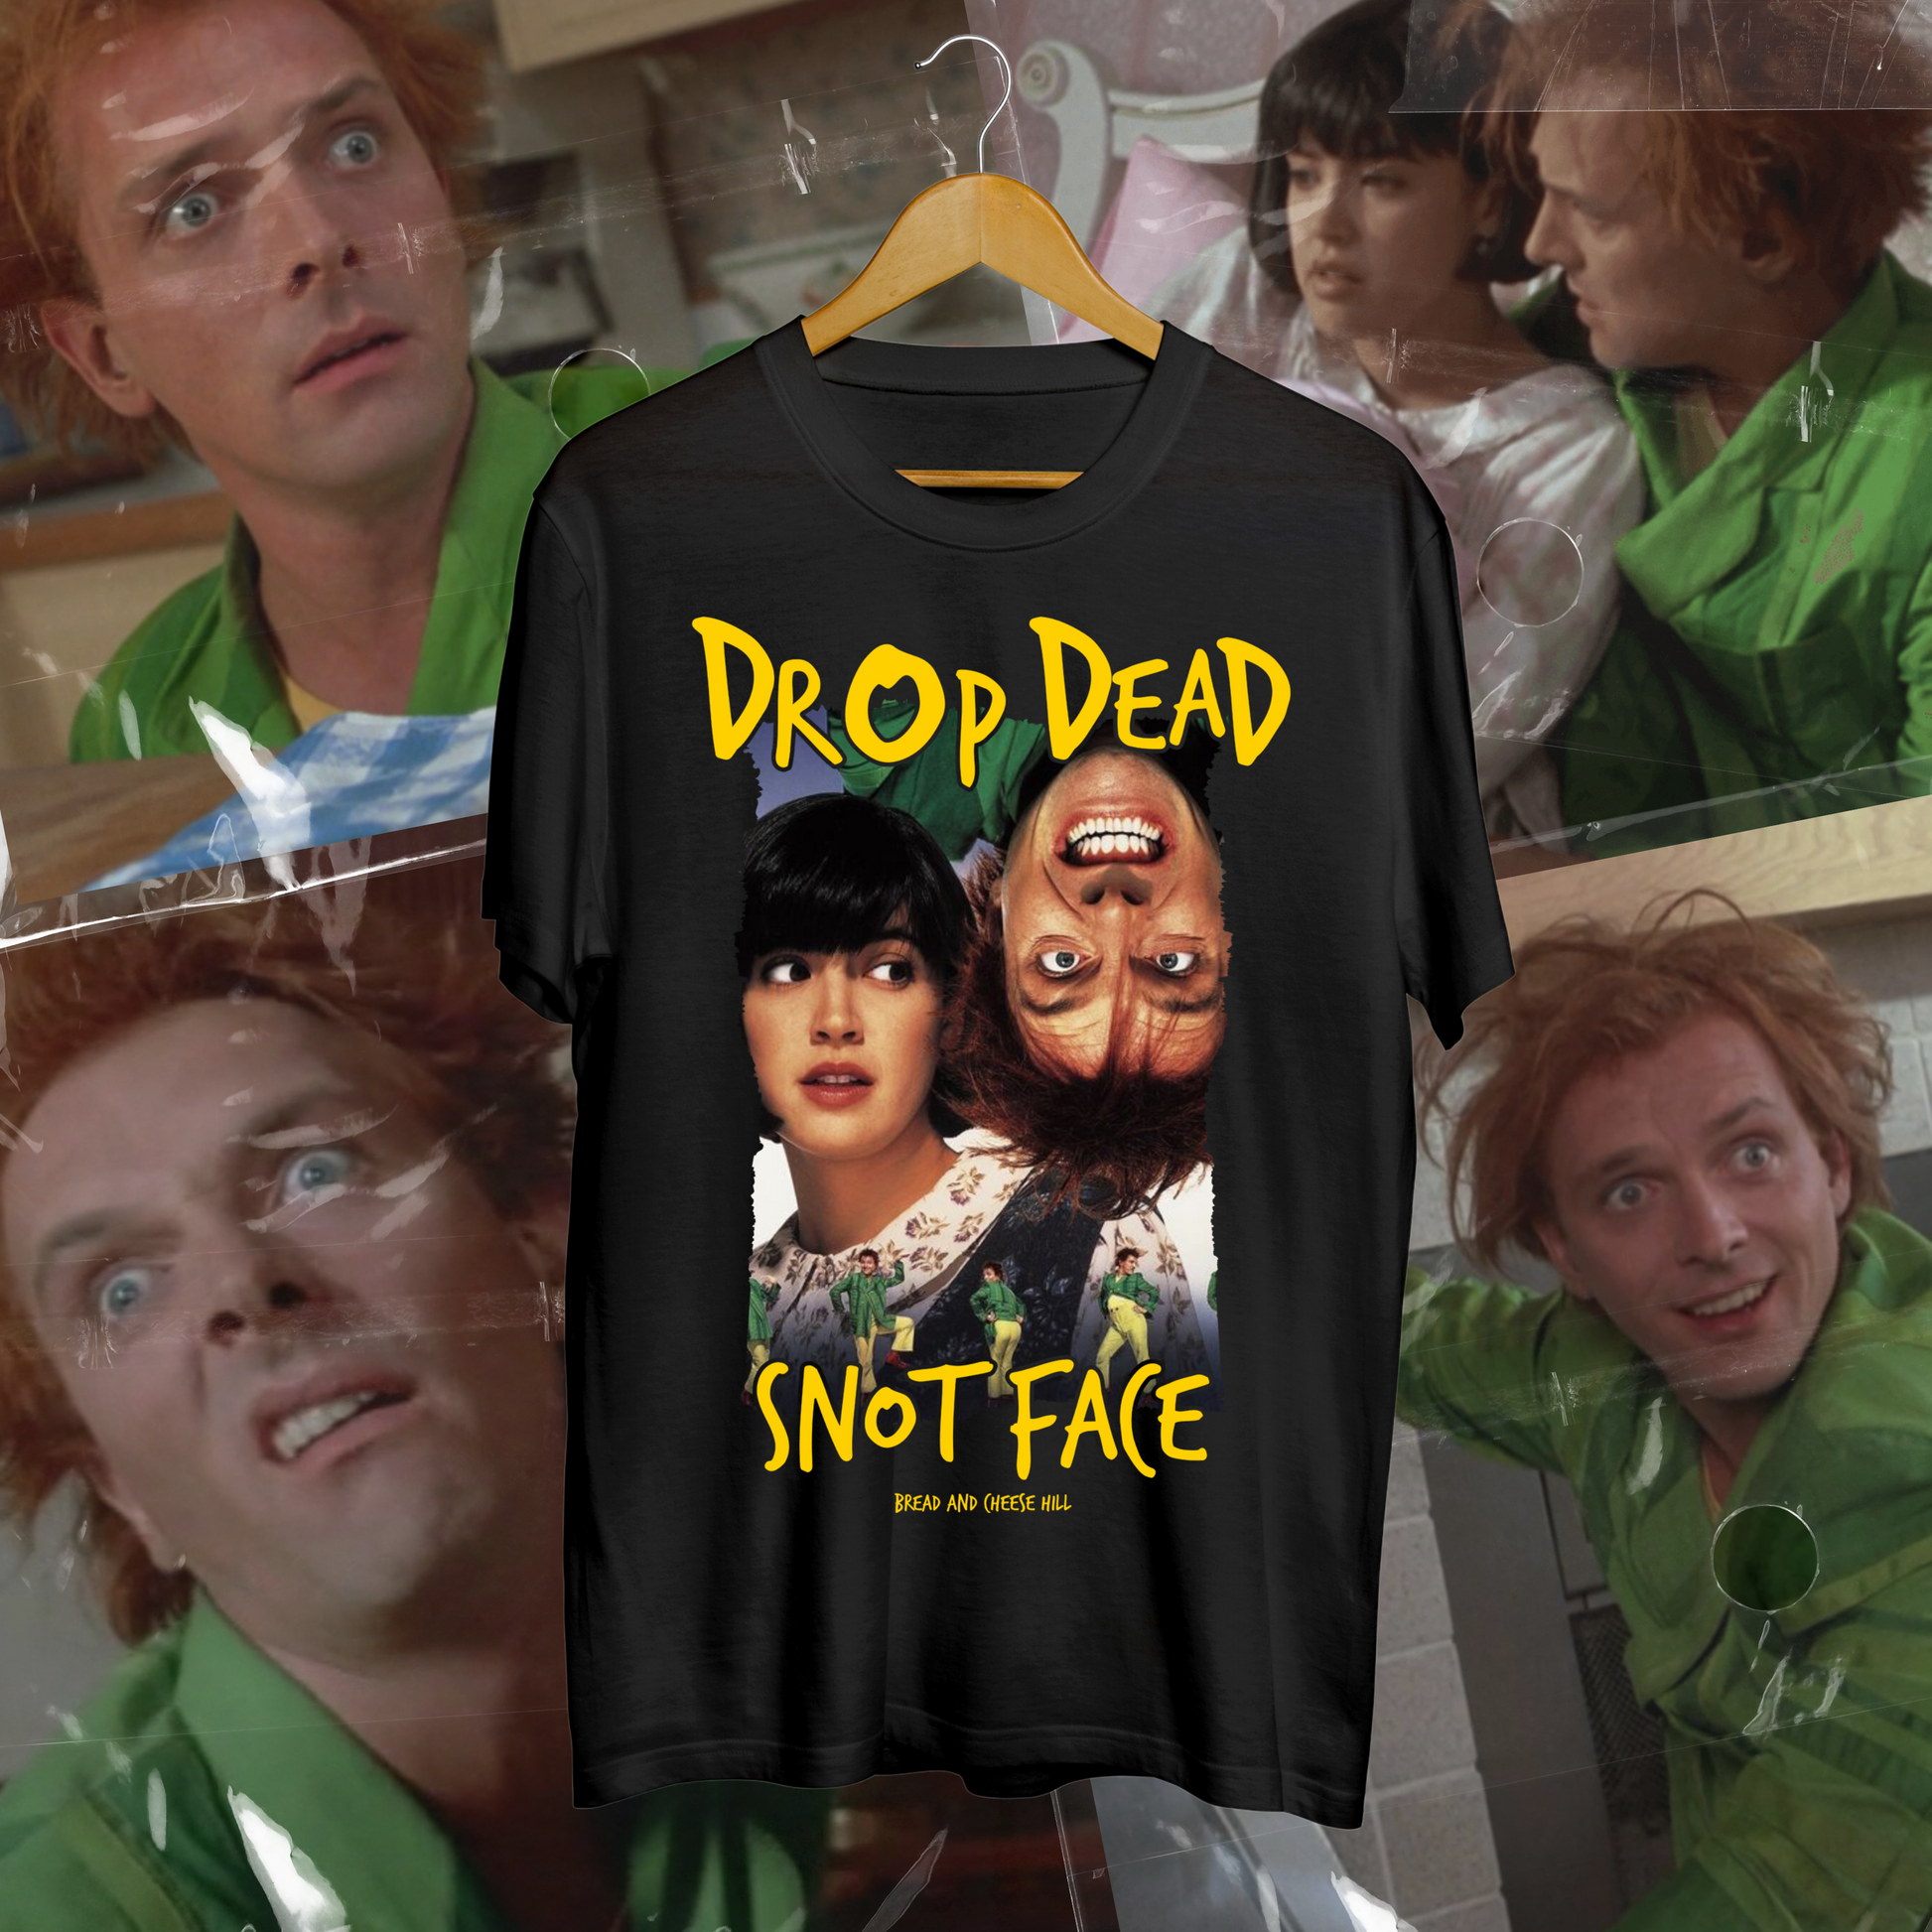 Drop Dead Fred - Snot Face - BACH T-ShirtBread And Cheese Hill